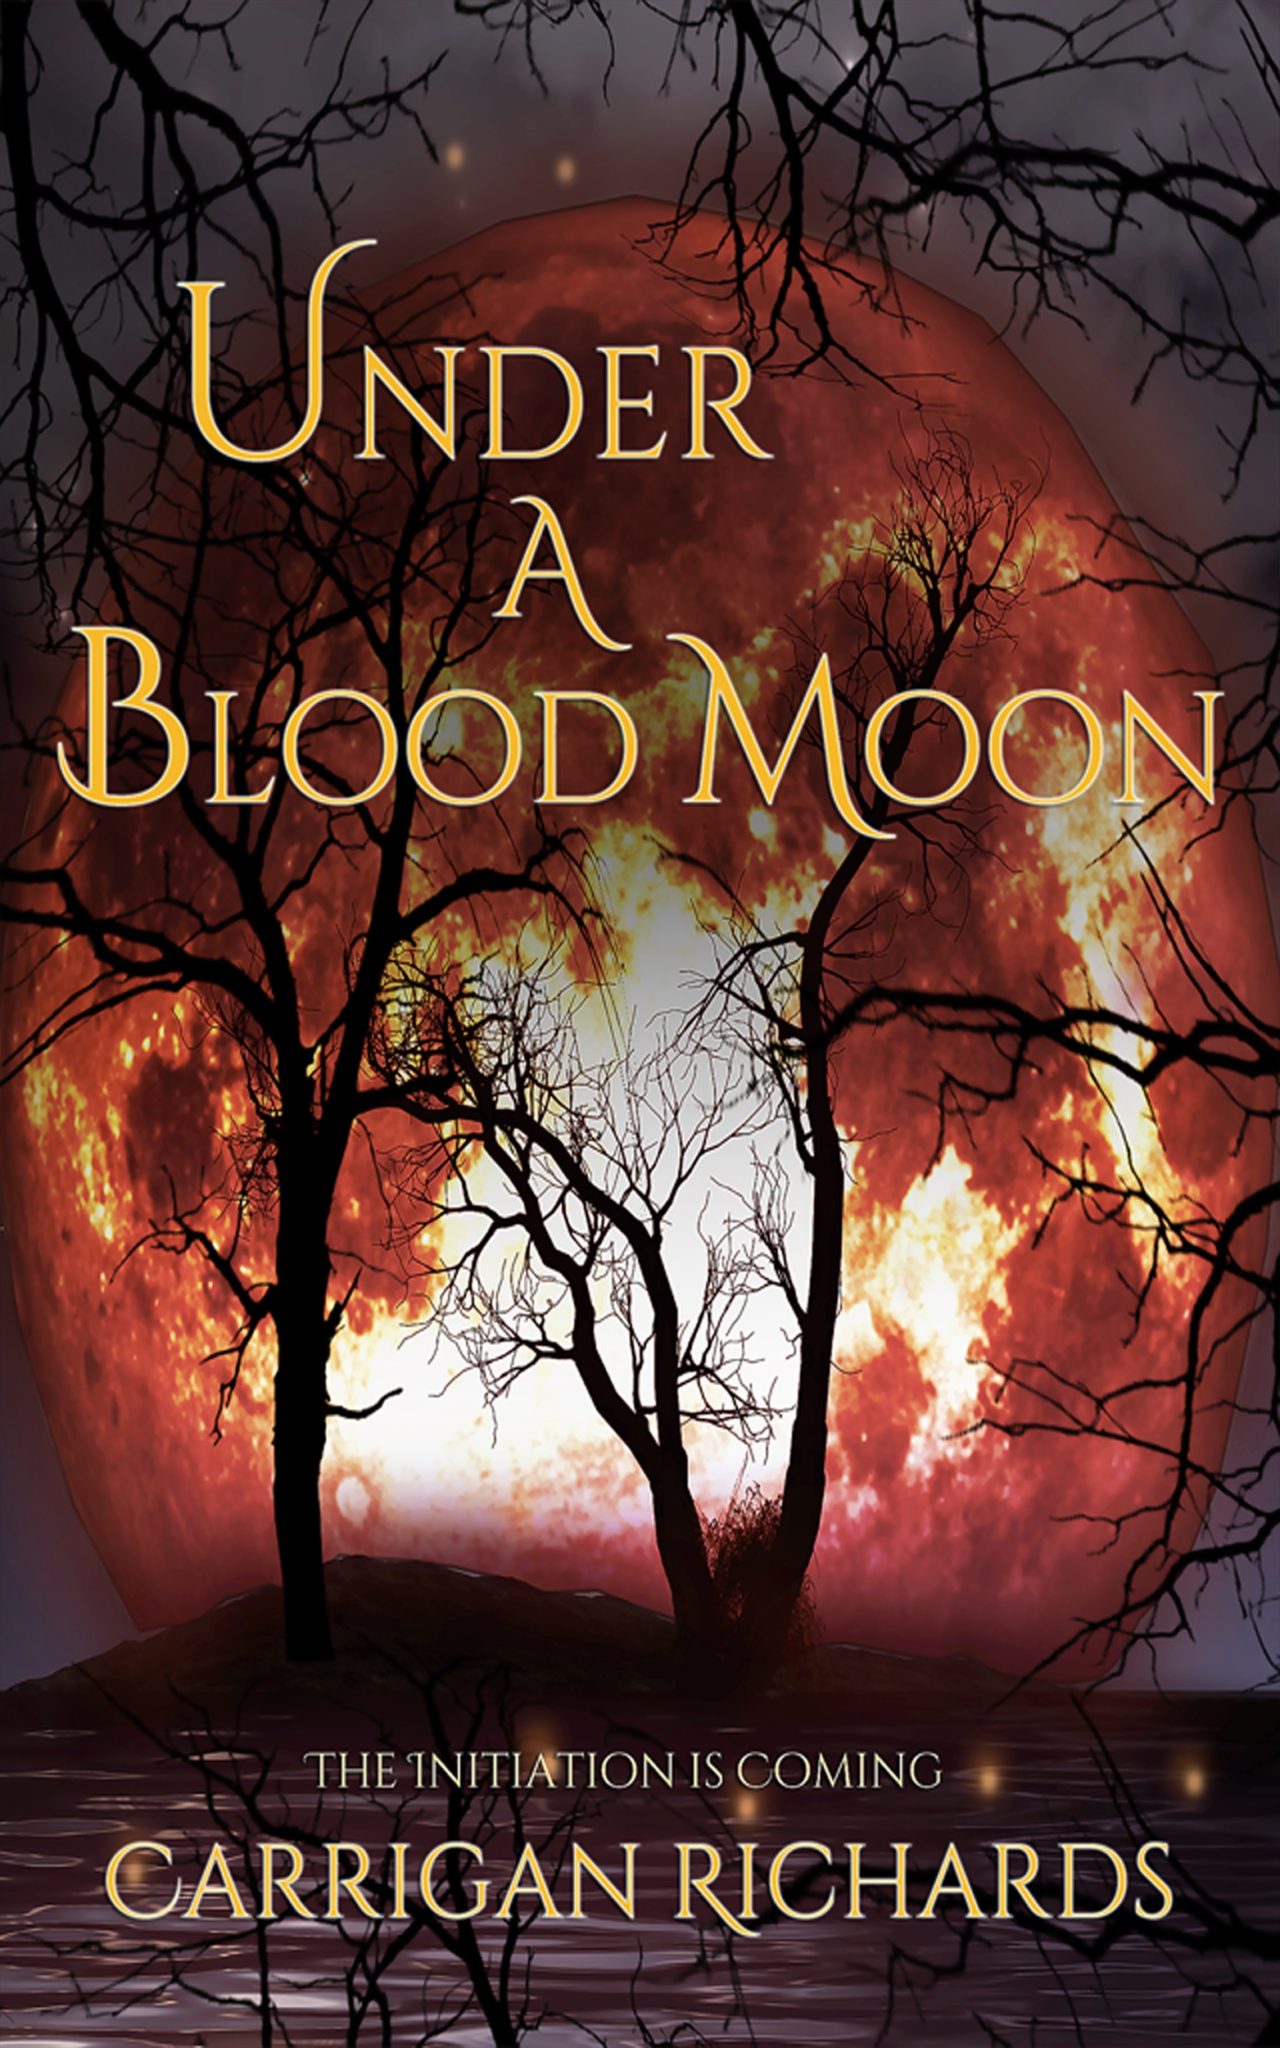 FREE: Under A Blood Moon by Carrigan Richards